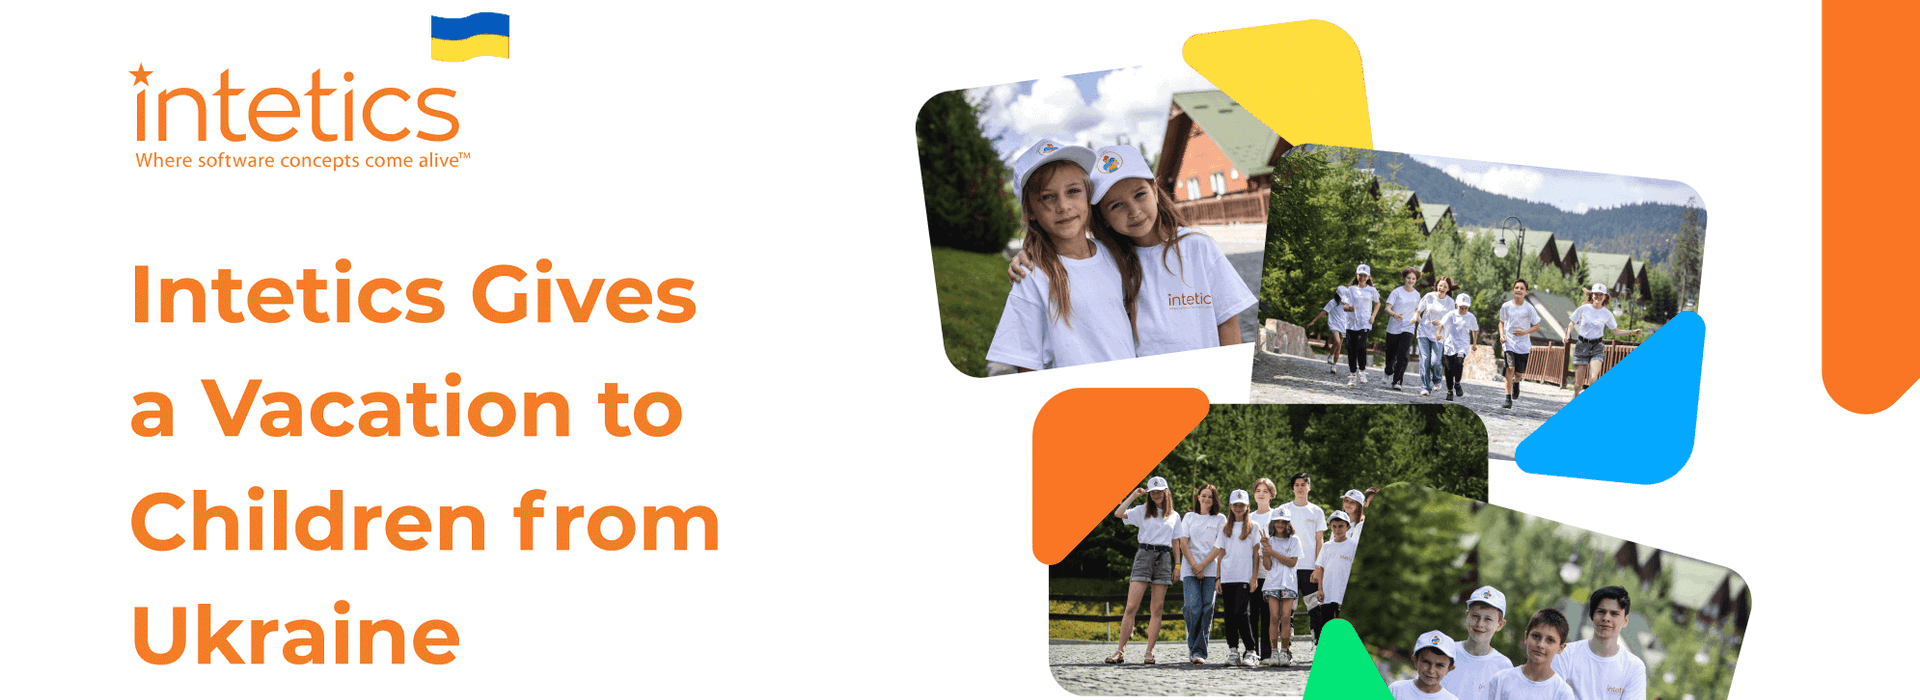 Intetics Gives a Vacation to Children from Ukraine